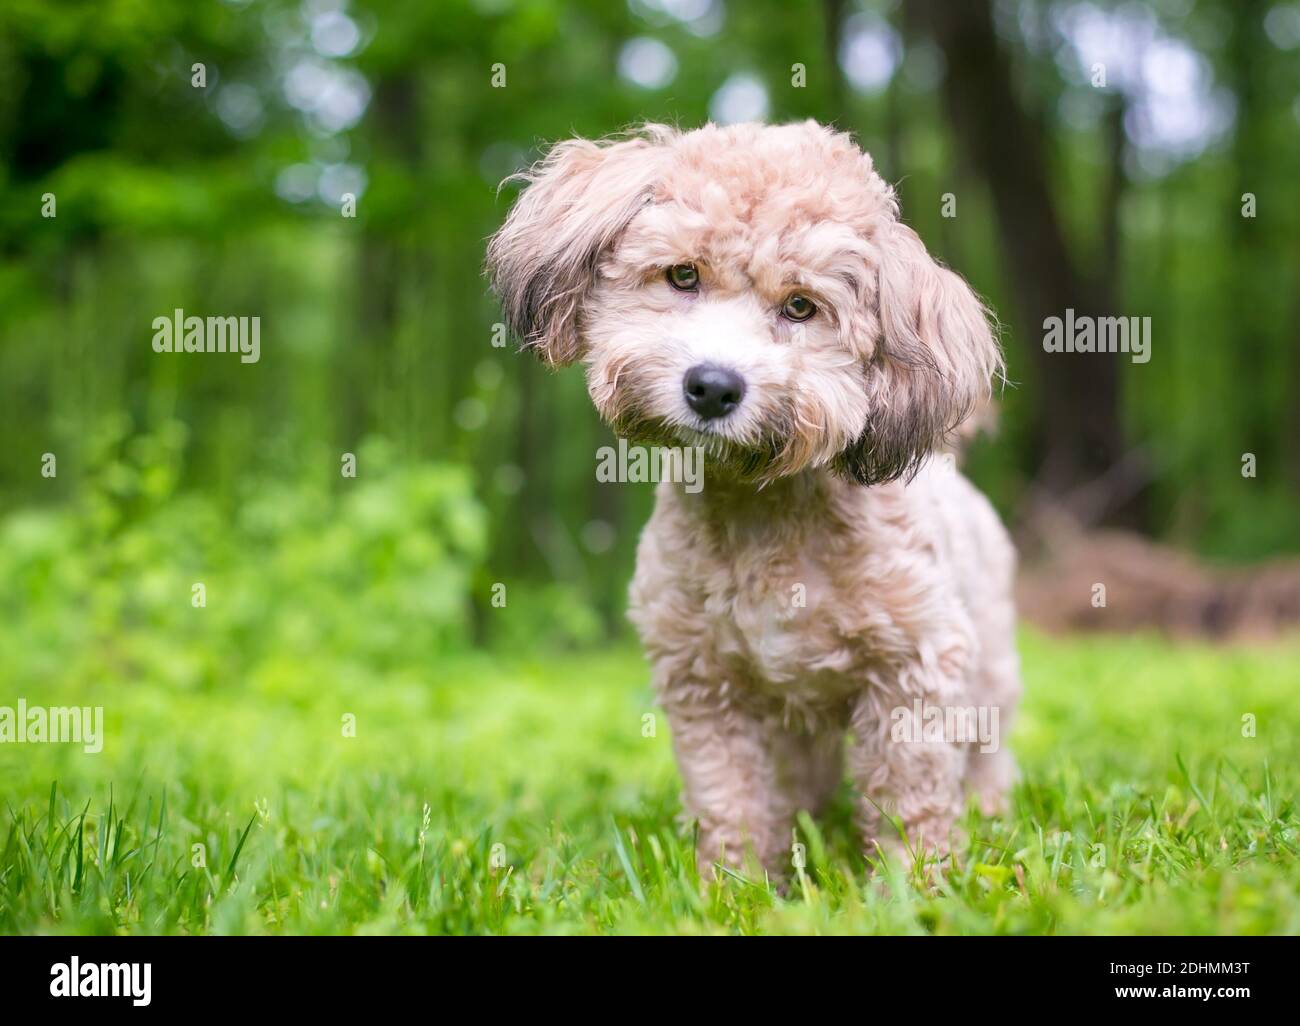 A small Poodle mixed breed dog looking at the camera with a head tilt Stock Photo